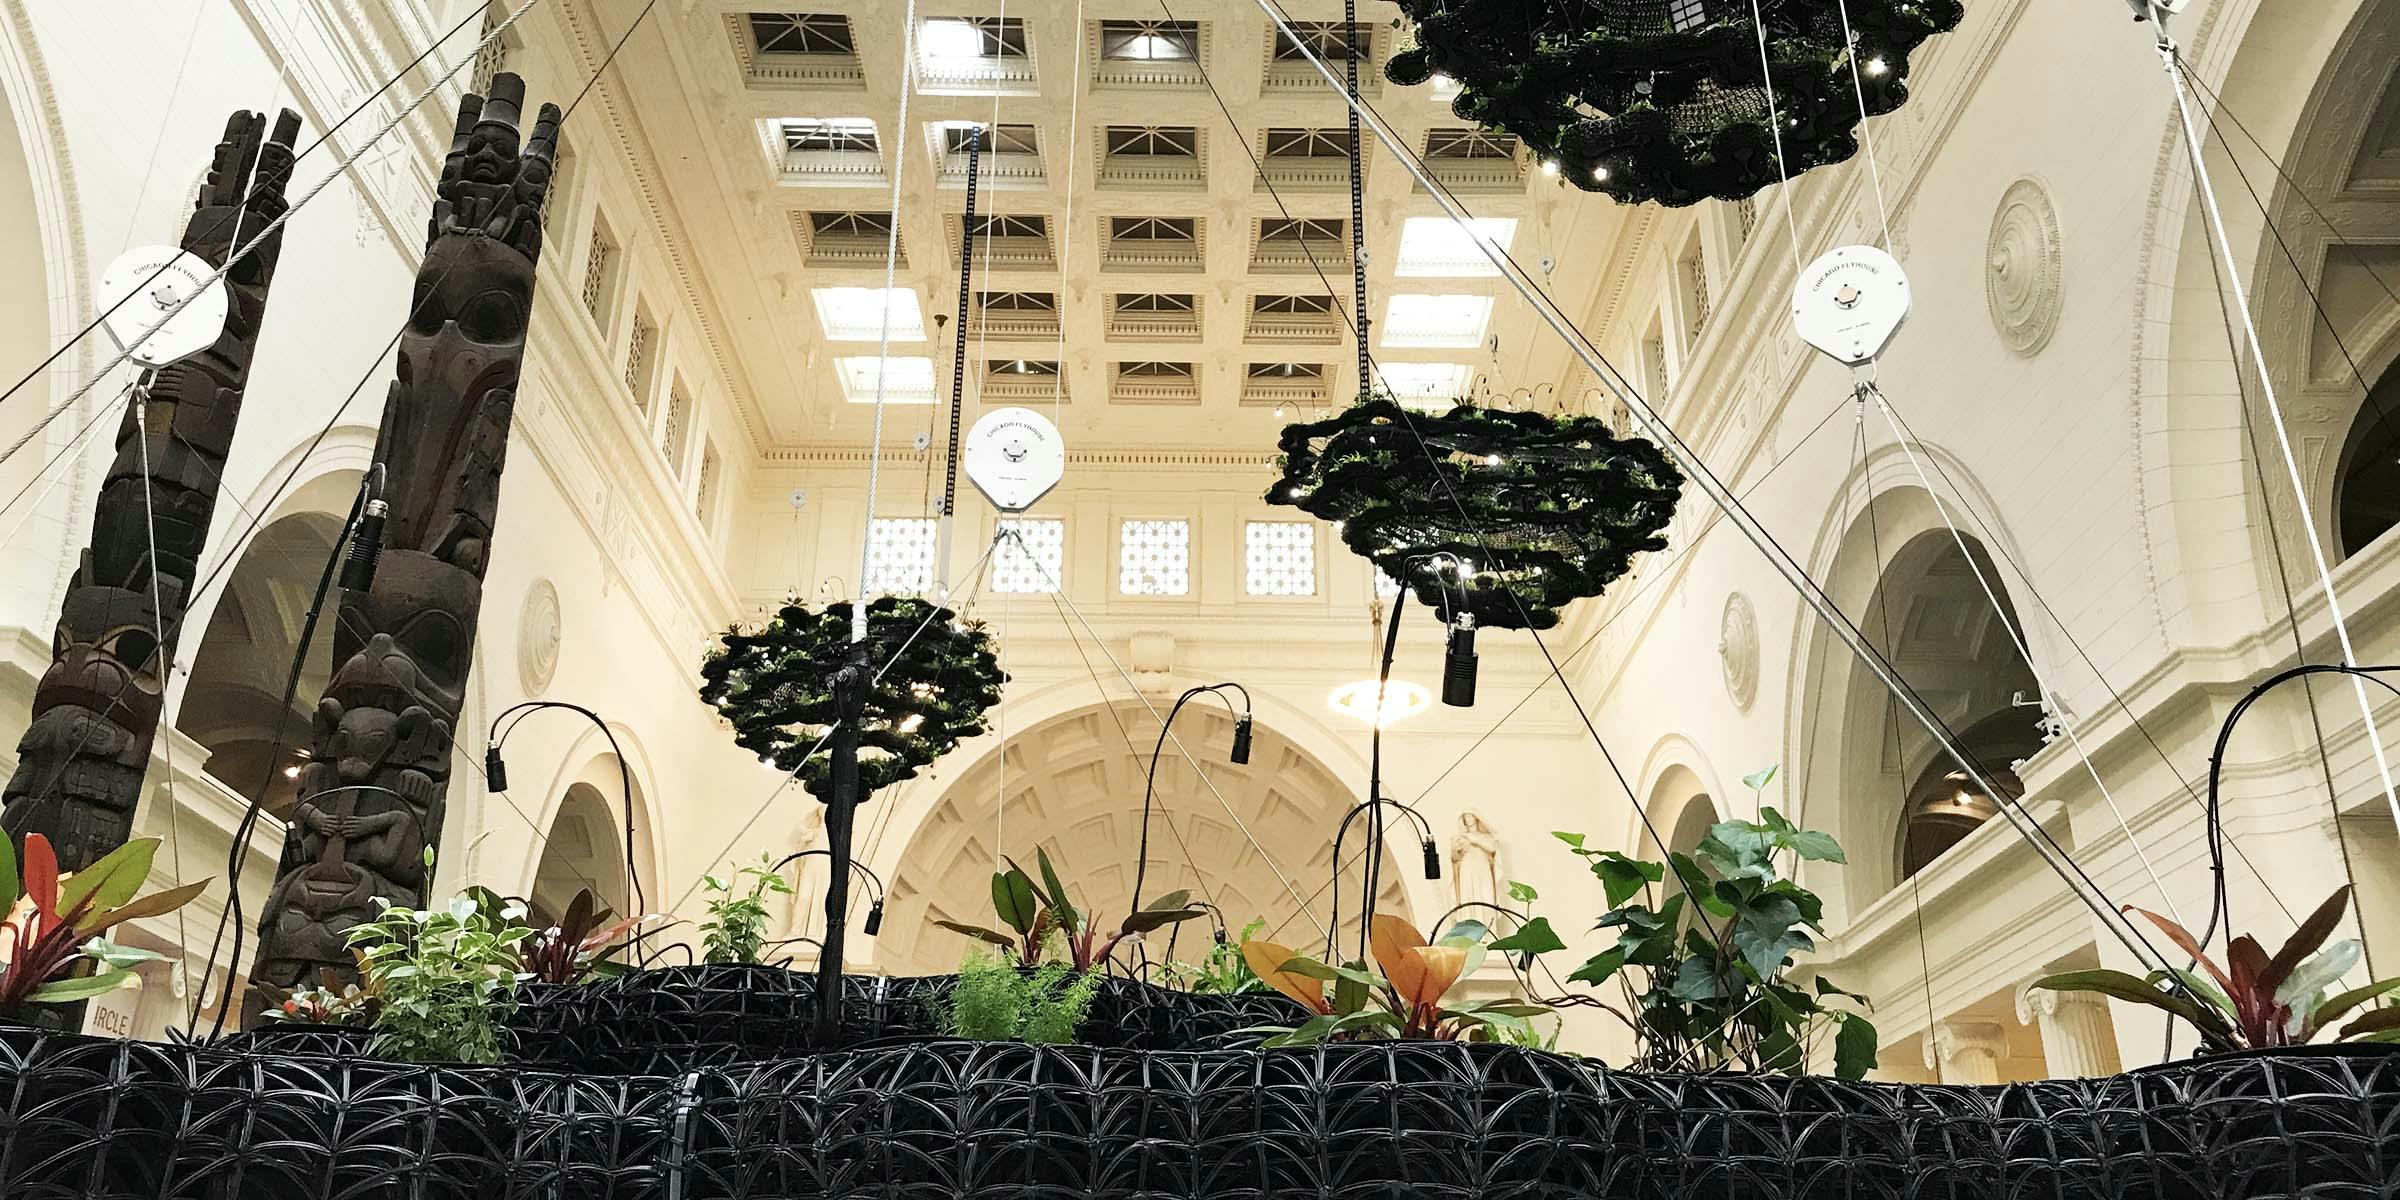 In the foreground, an eye-level view of a black plastic structure holding plants. The background includes the museum's Stanley Field Hall, with two totem poles to the left and three cloud-like black plastic structures suspended from the ceiling.